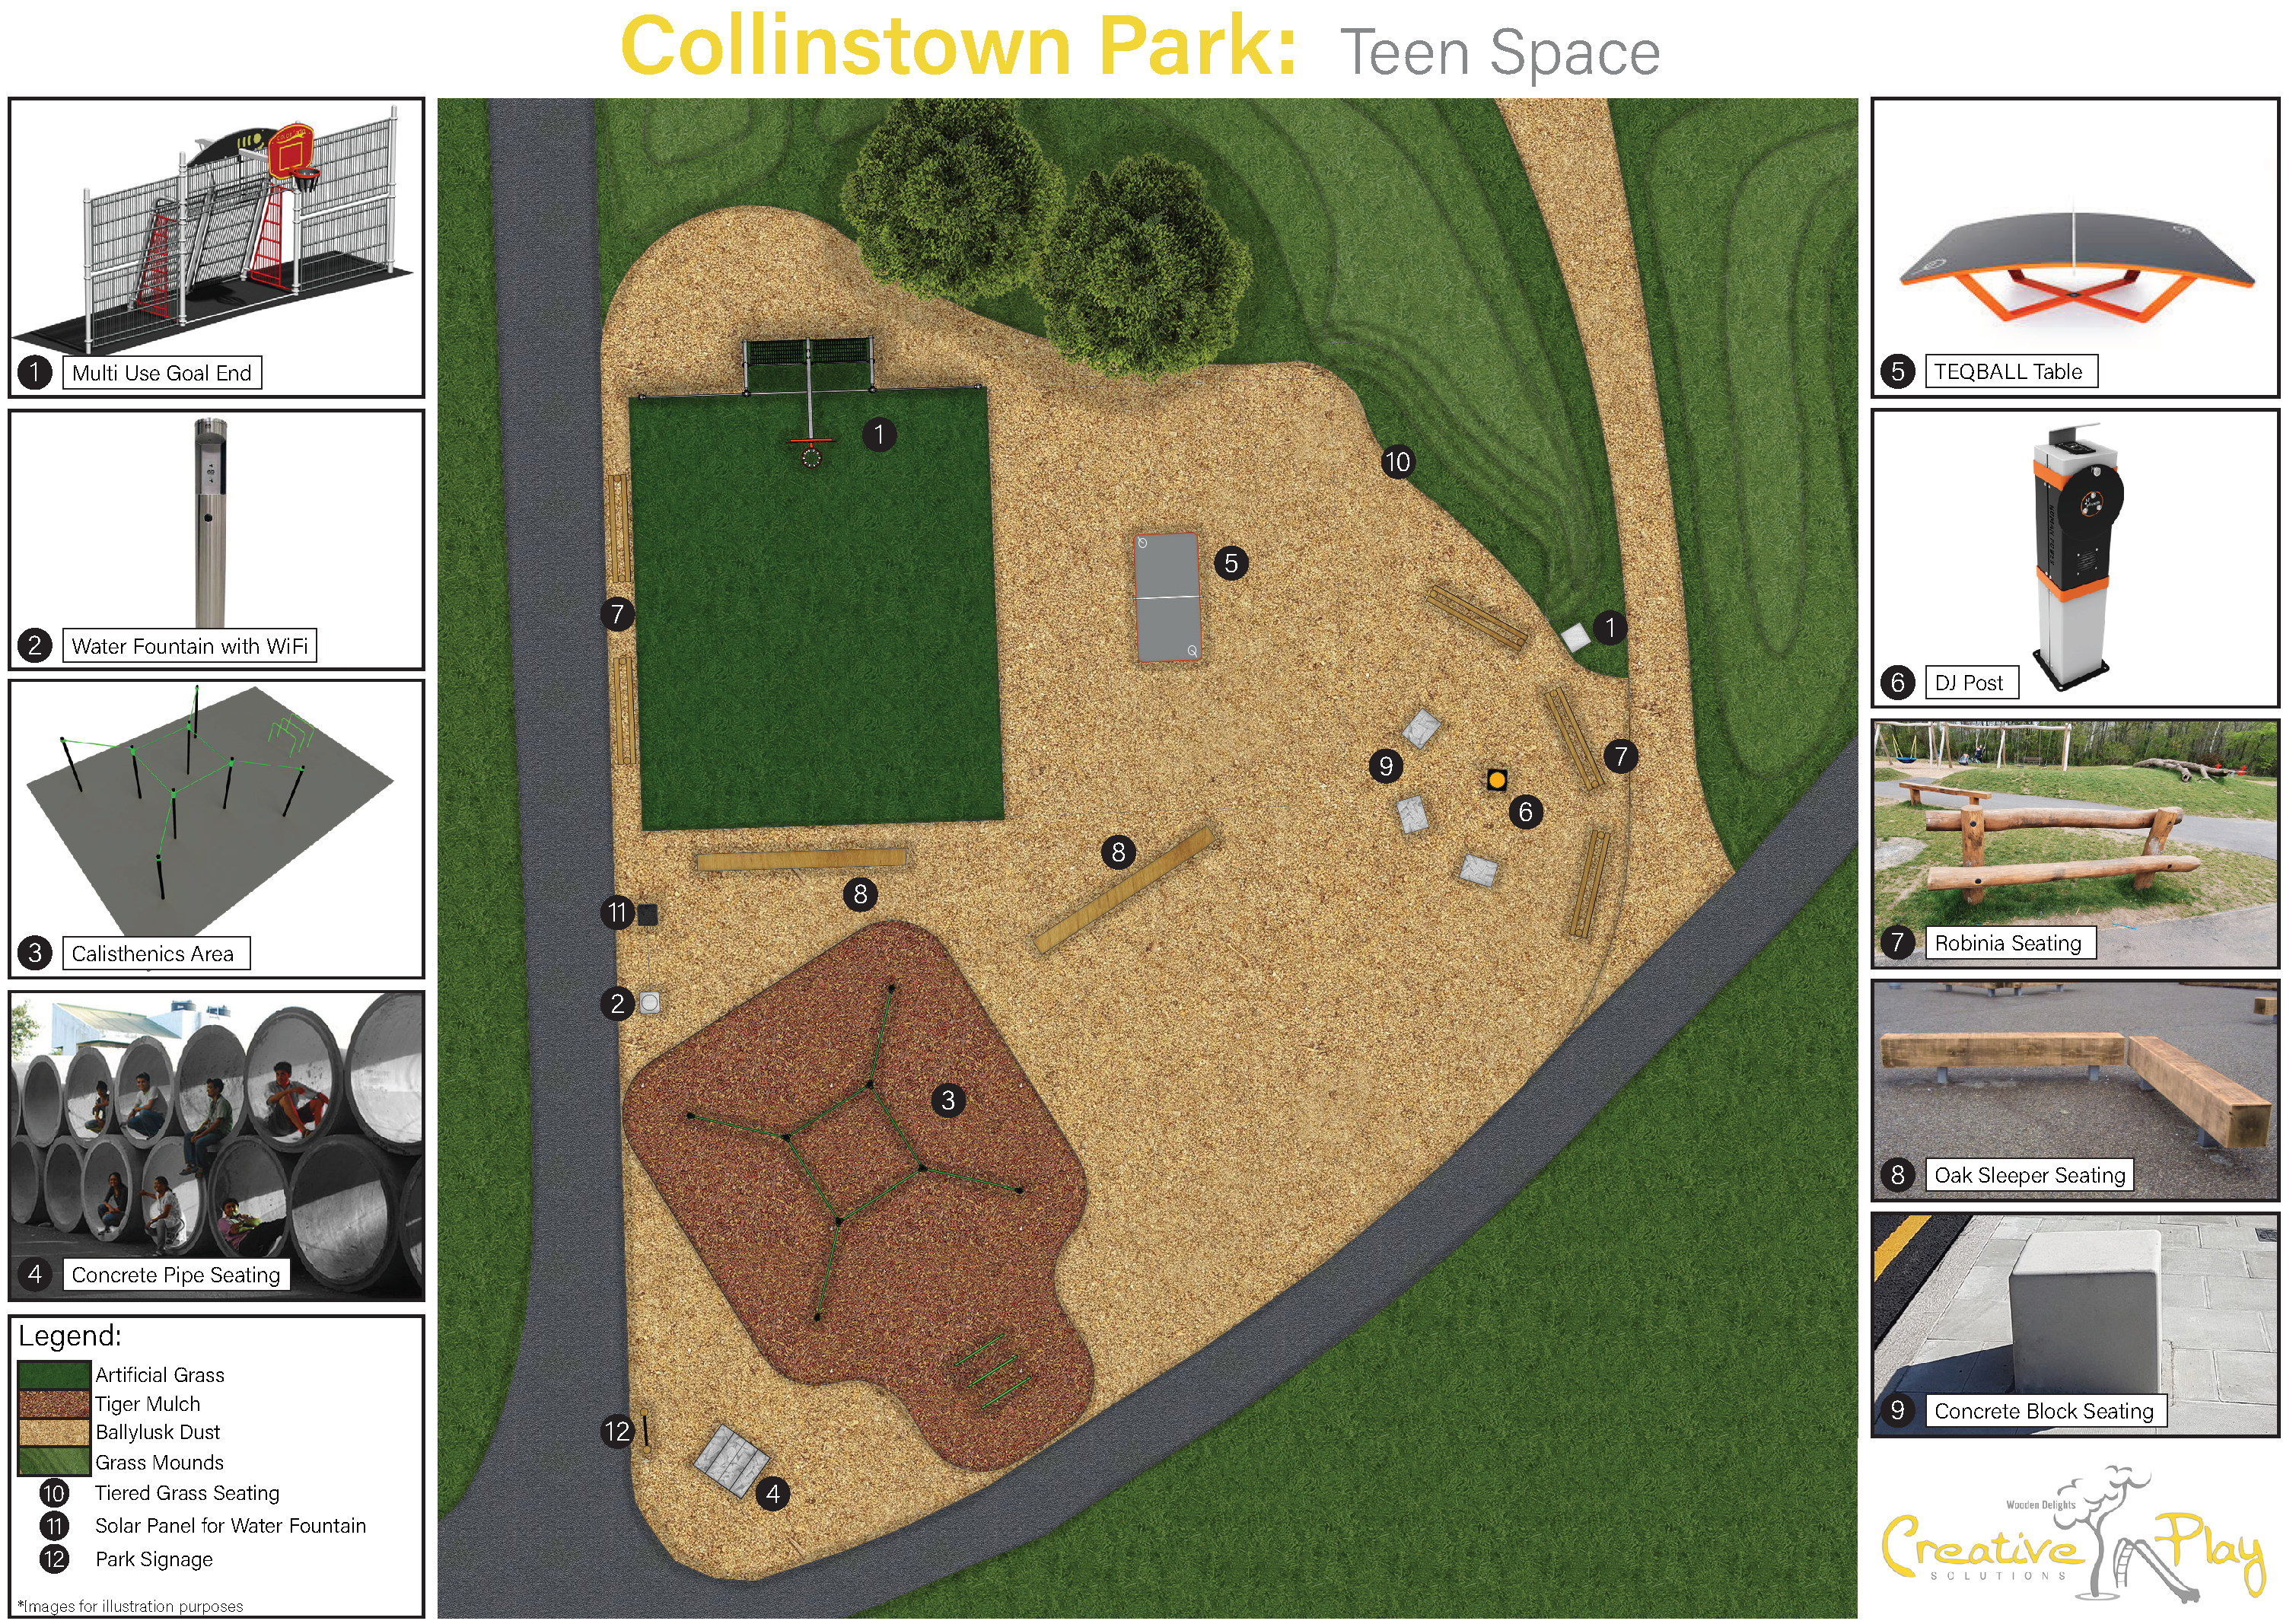 Rev_2_Collinstown-Teen-Space-without-Parkour